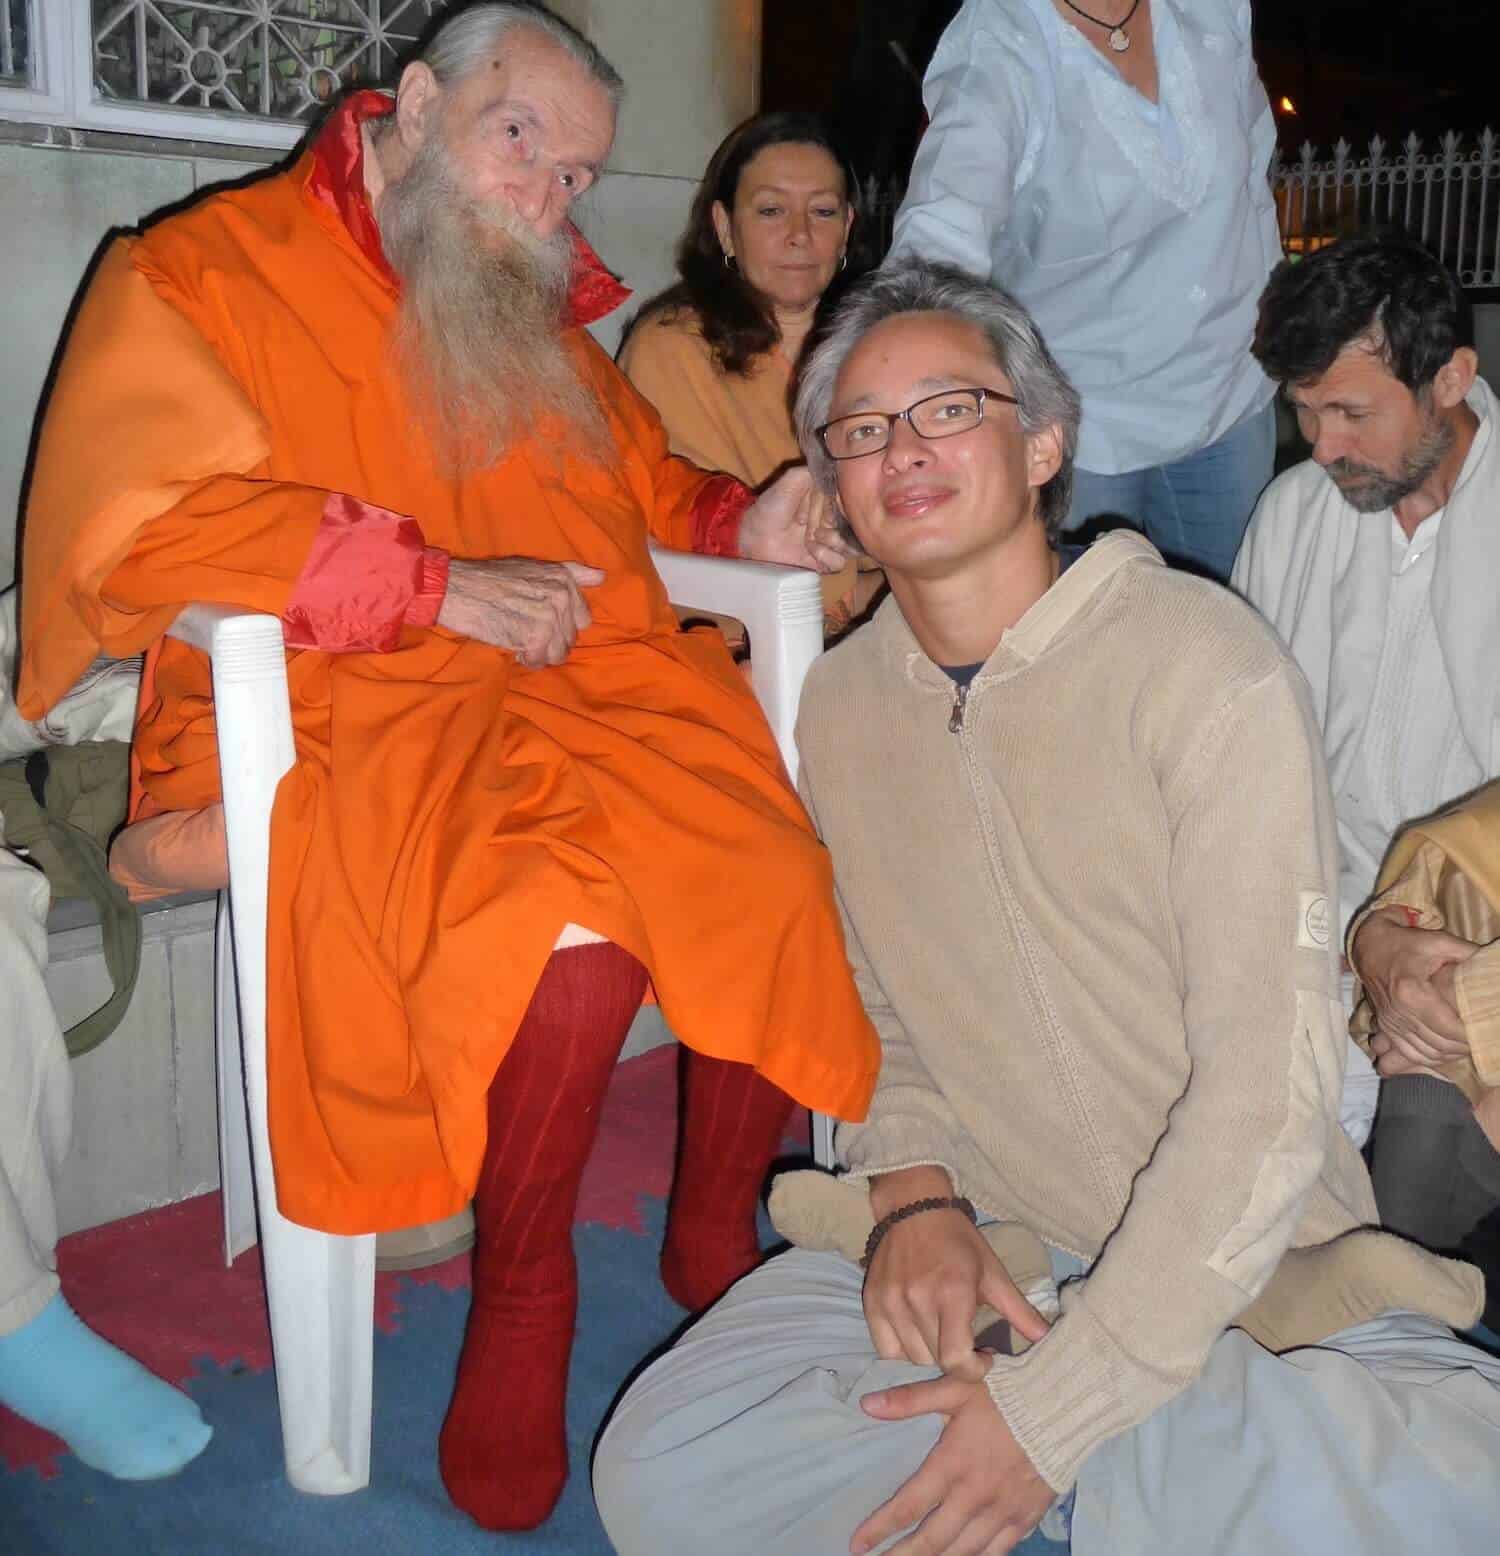 A group of people sit around a man in an orange robe during a paediatric osteopathy session.